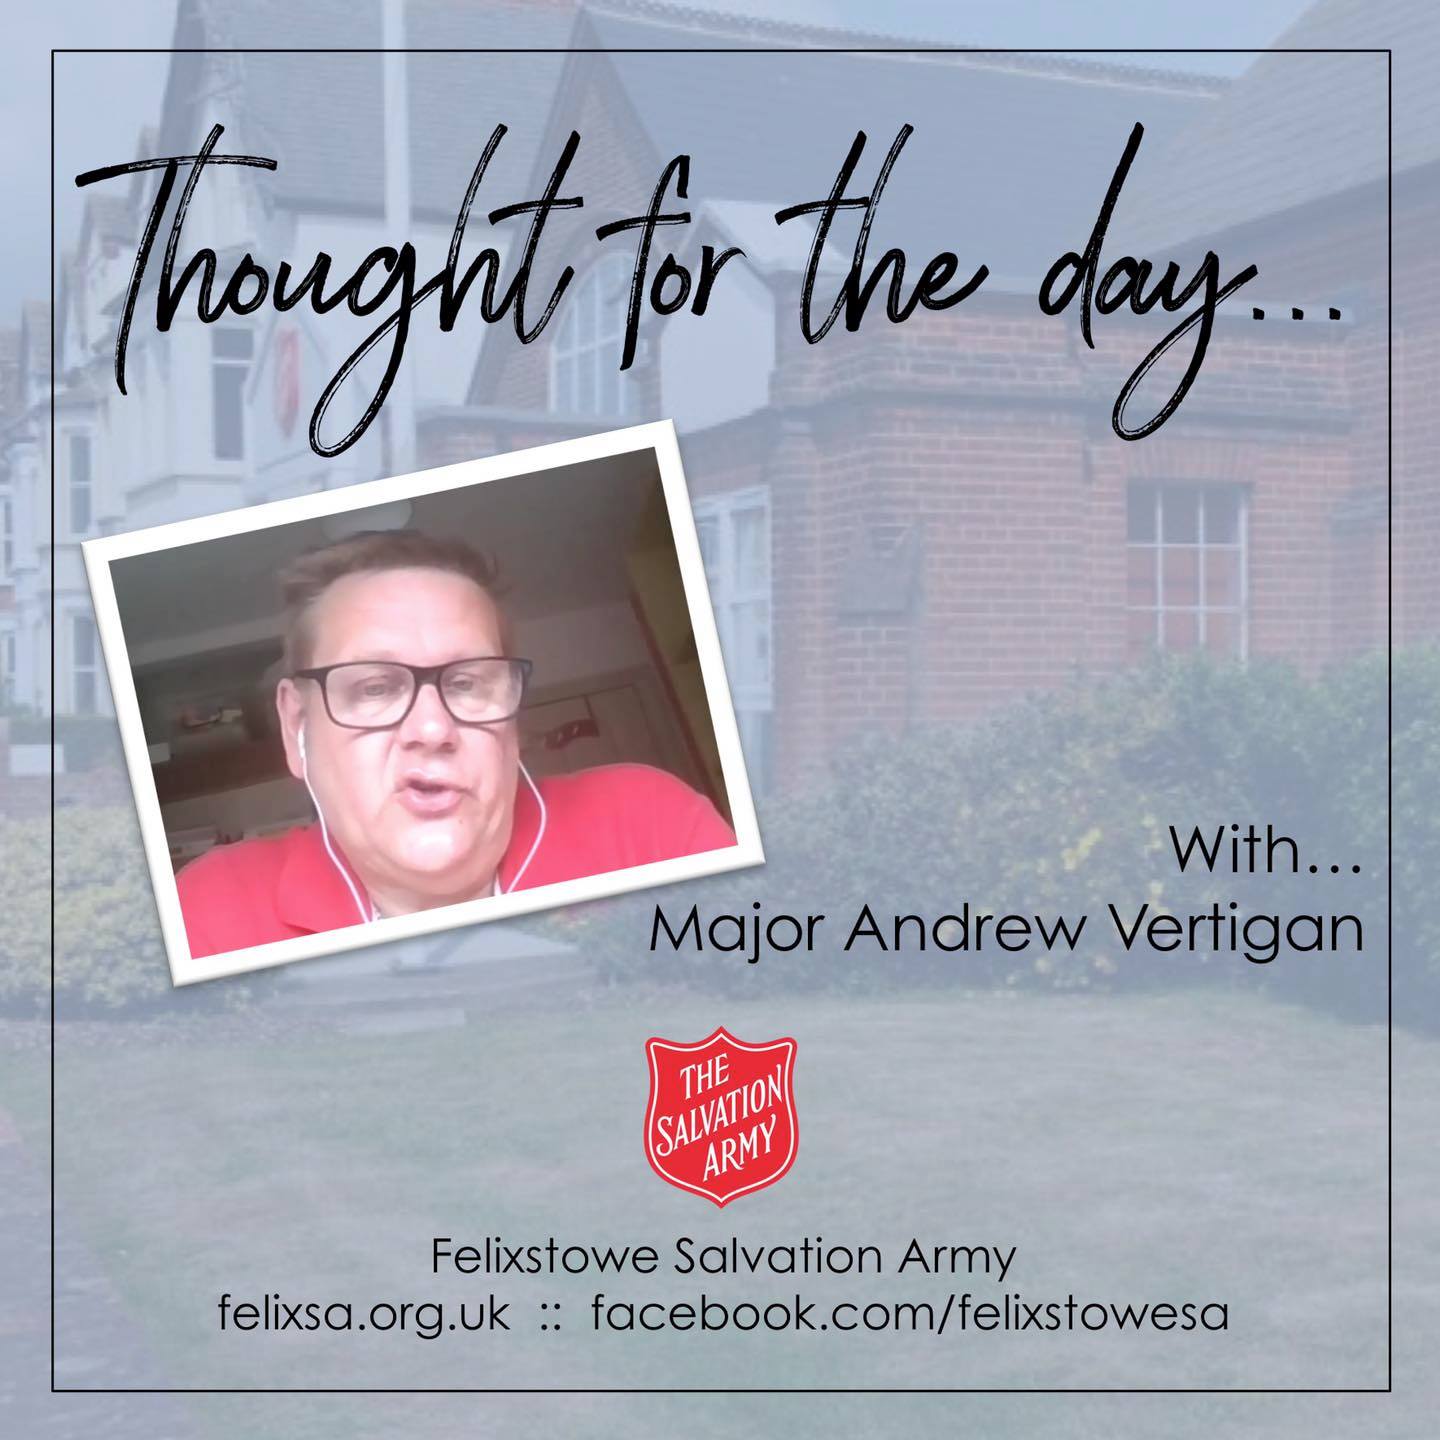 Thought for the Day with Major Andrew Vertigan